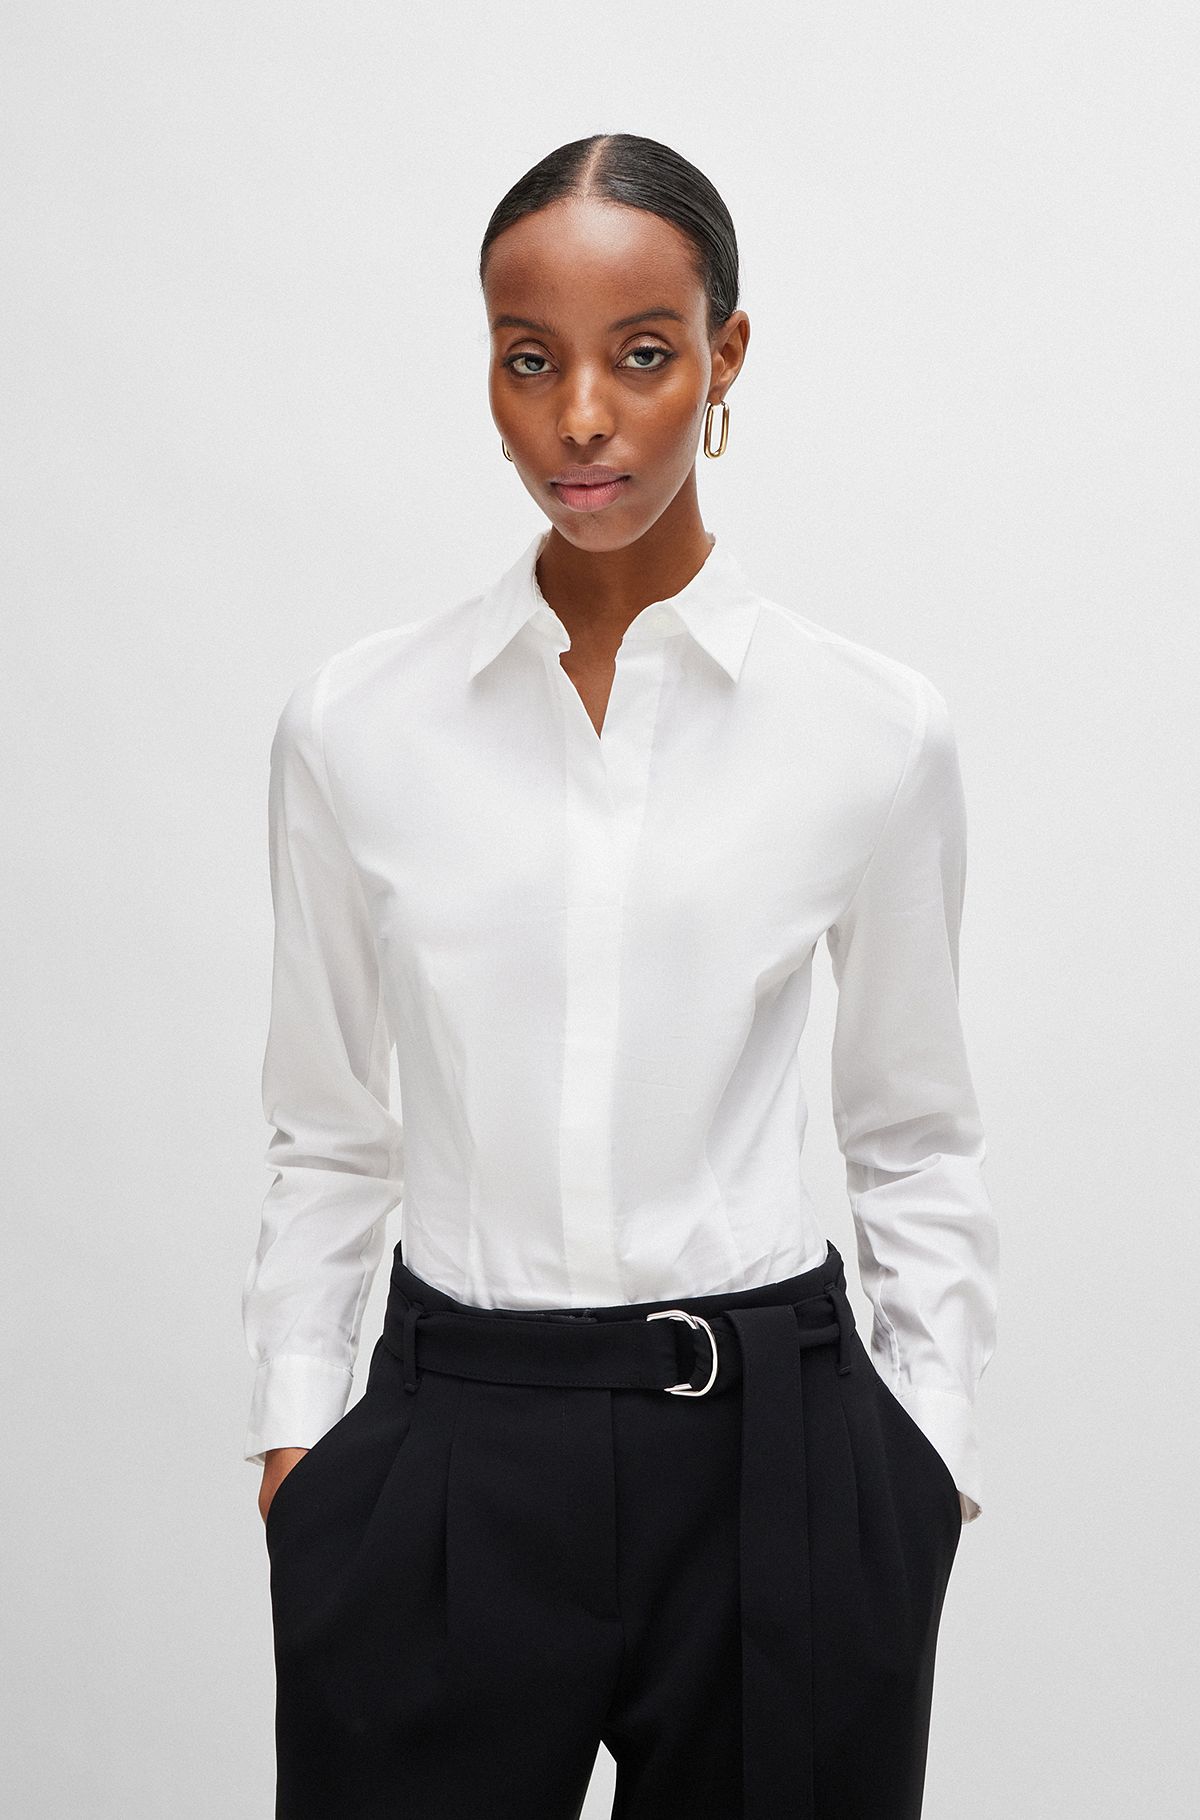 Slim-fit blouse in a cotton blend, White